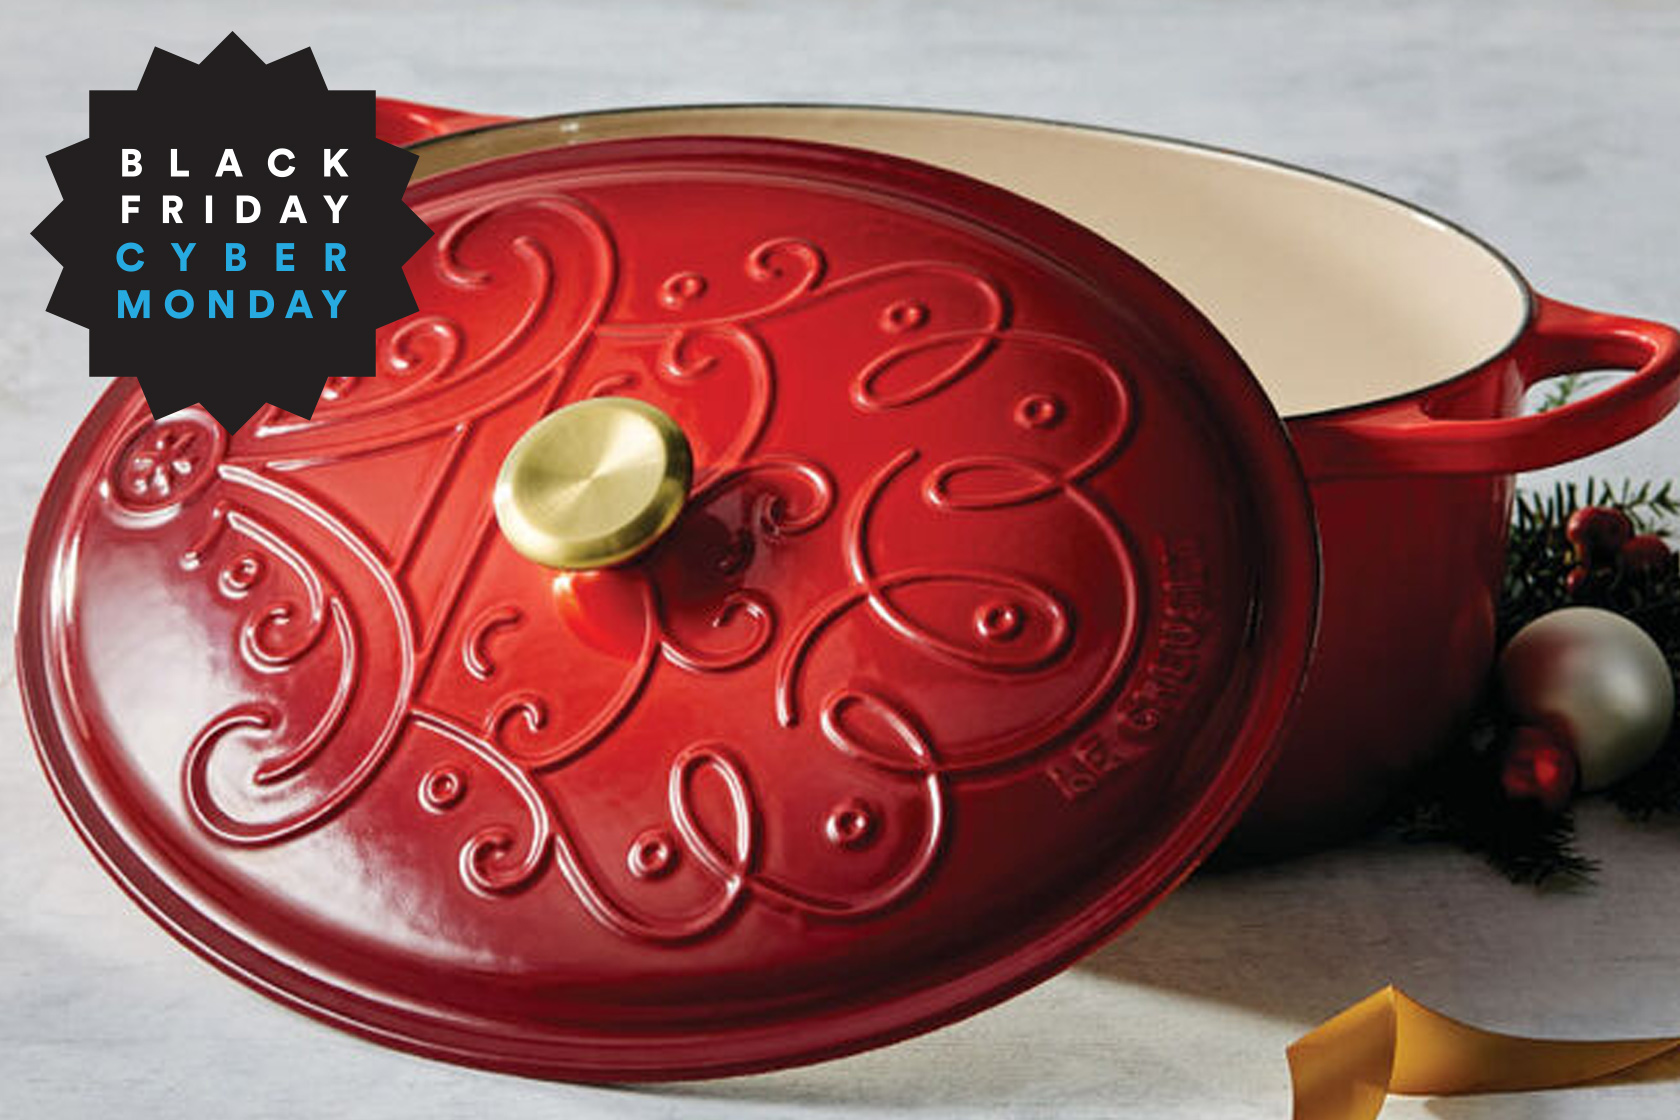 Le Creuset's Black Friday sale has Dutch ovens up to 130 off